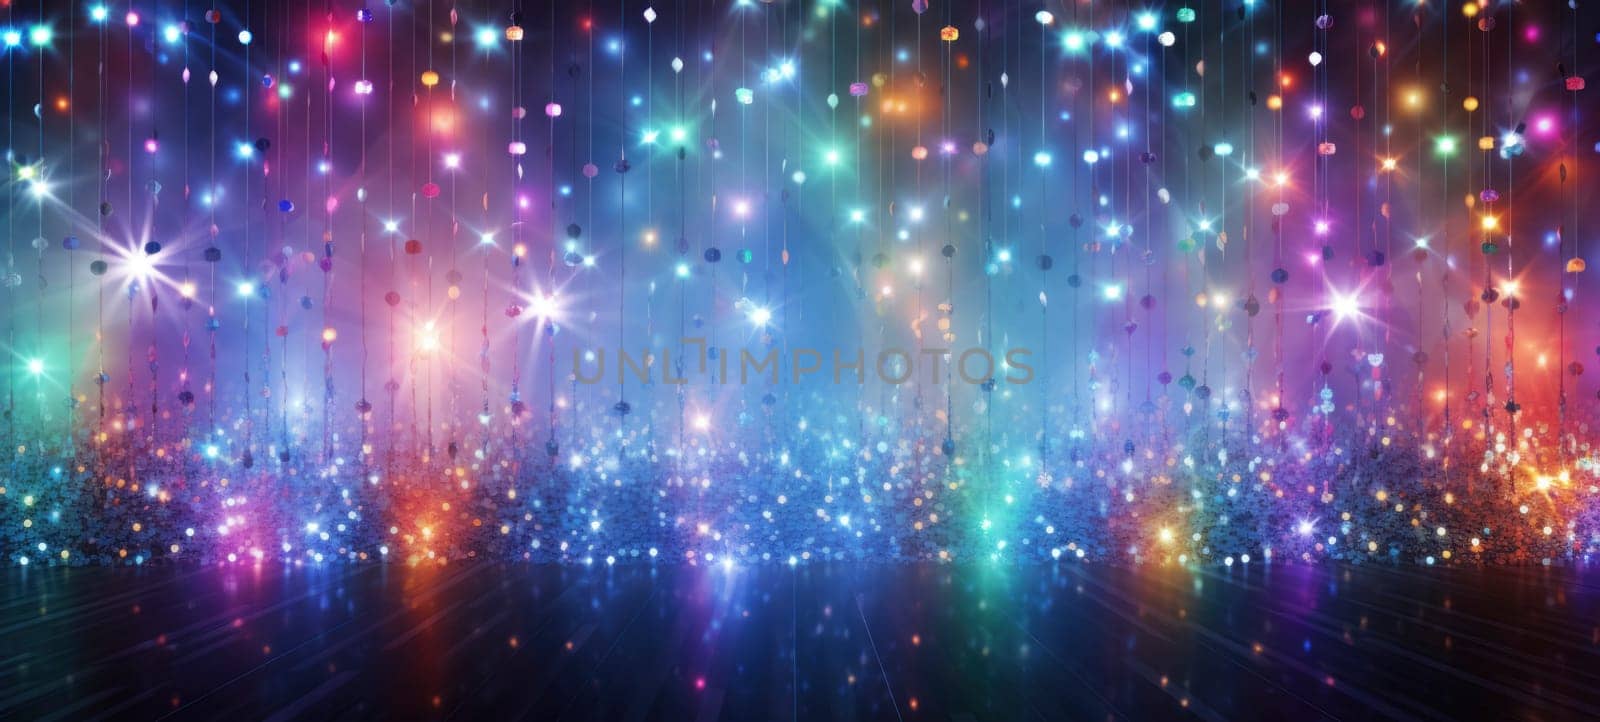 Abstract holiday background with flashing disco lights on the wall